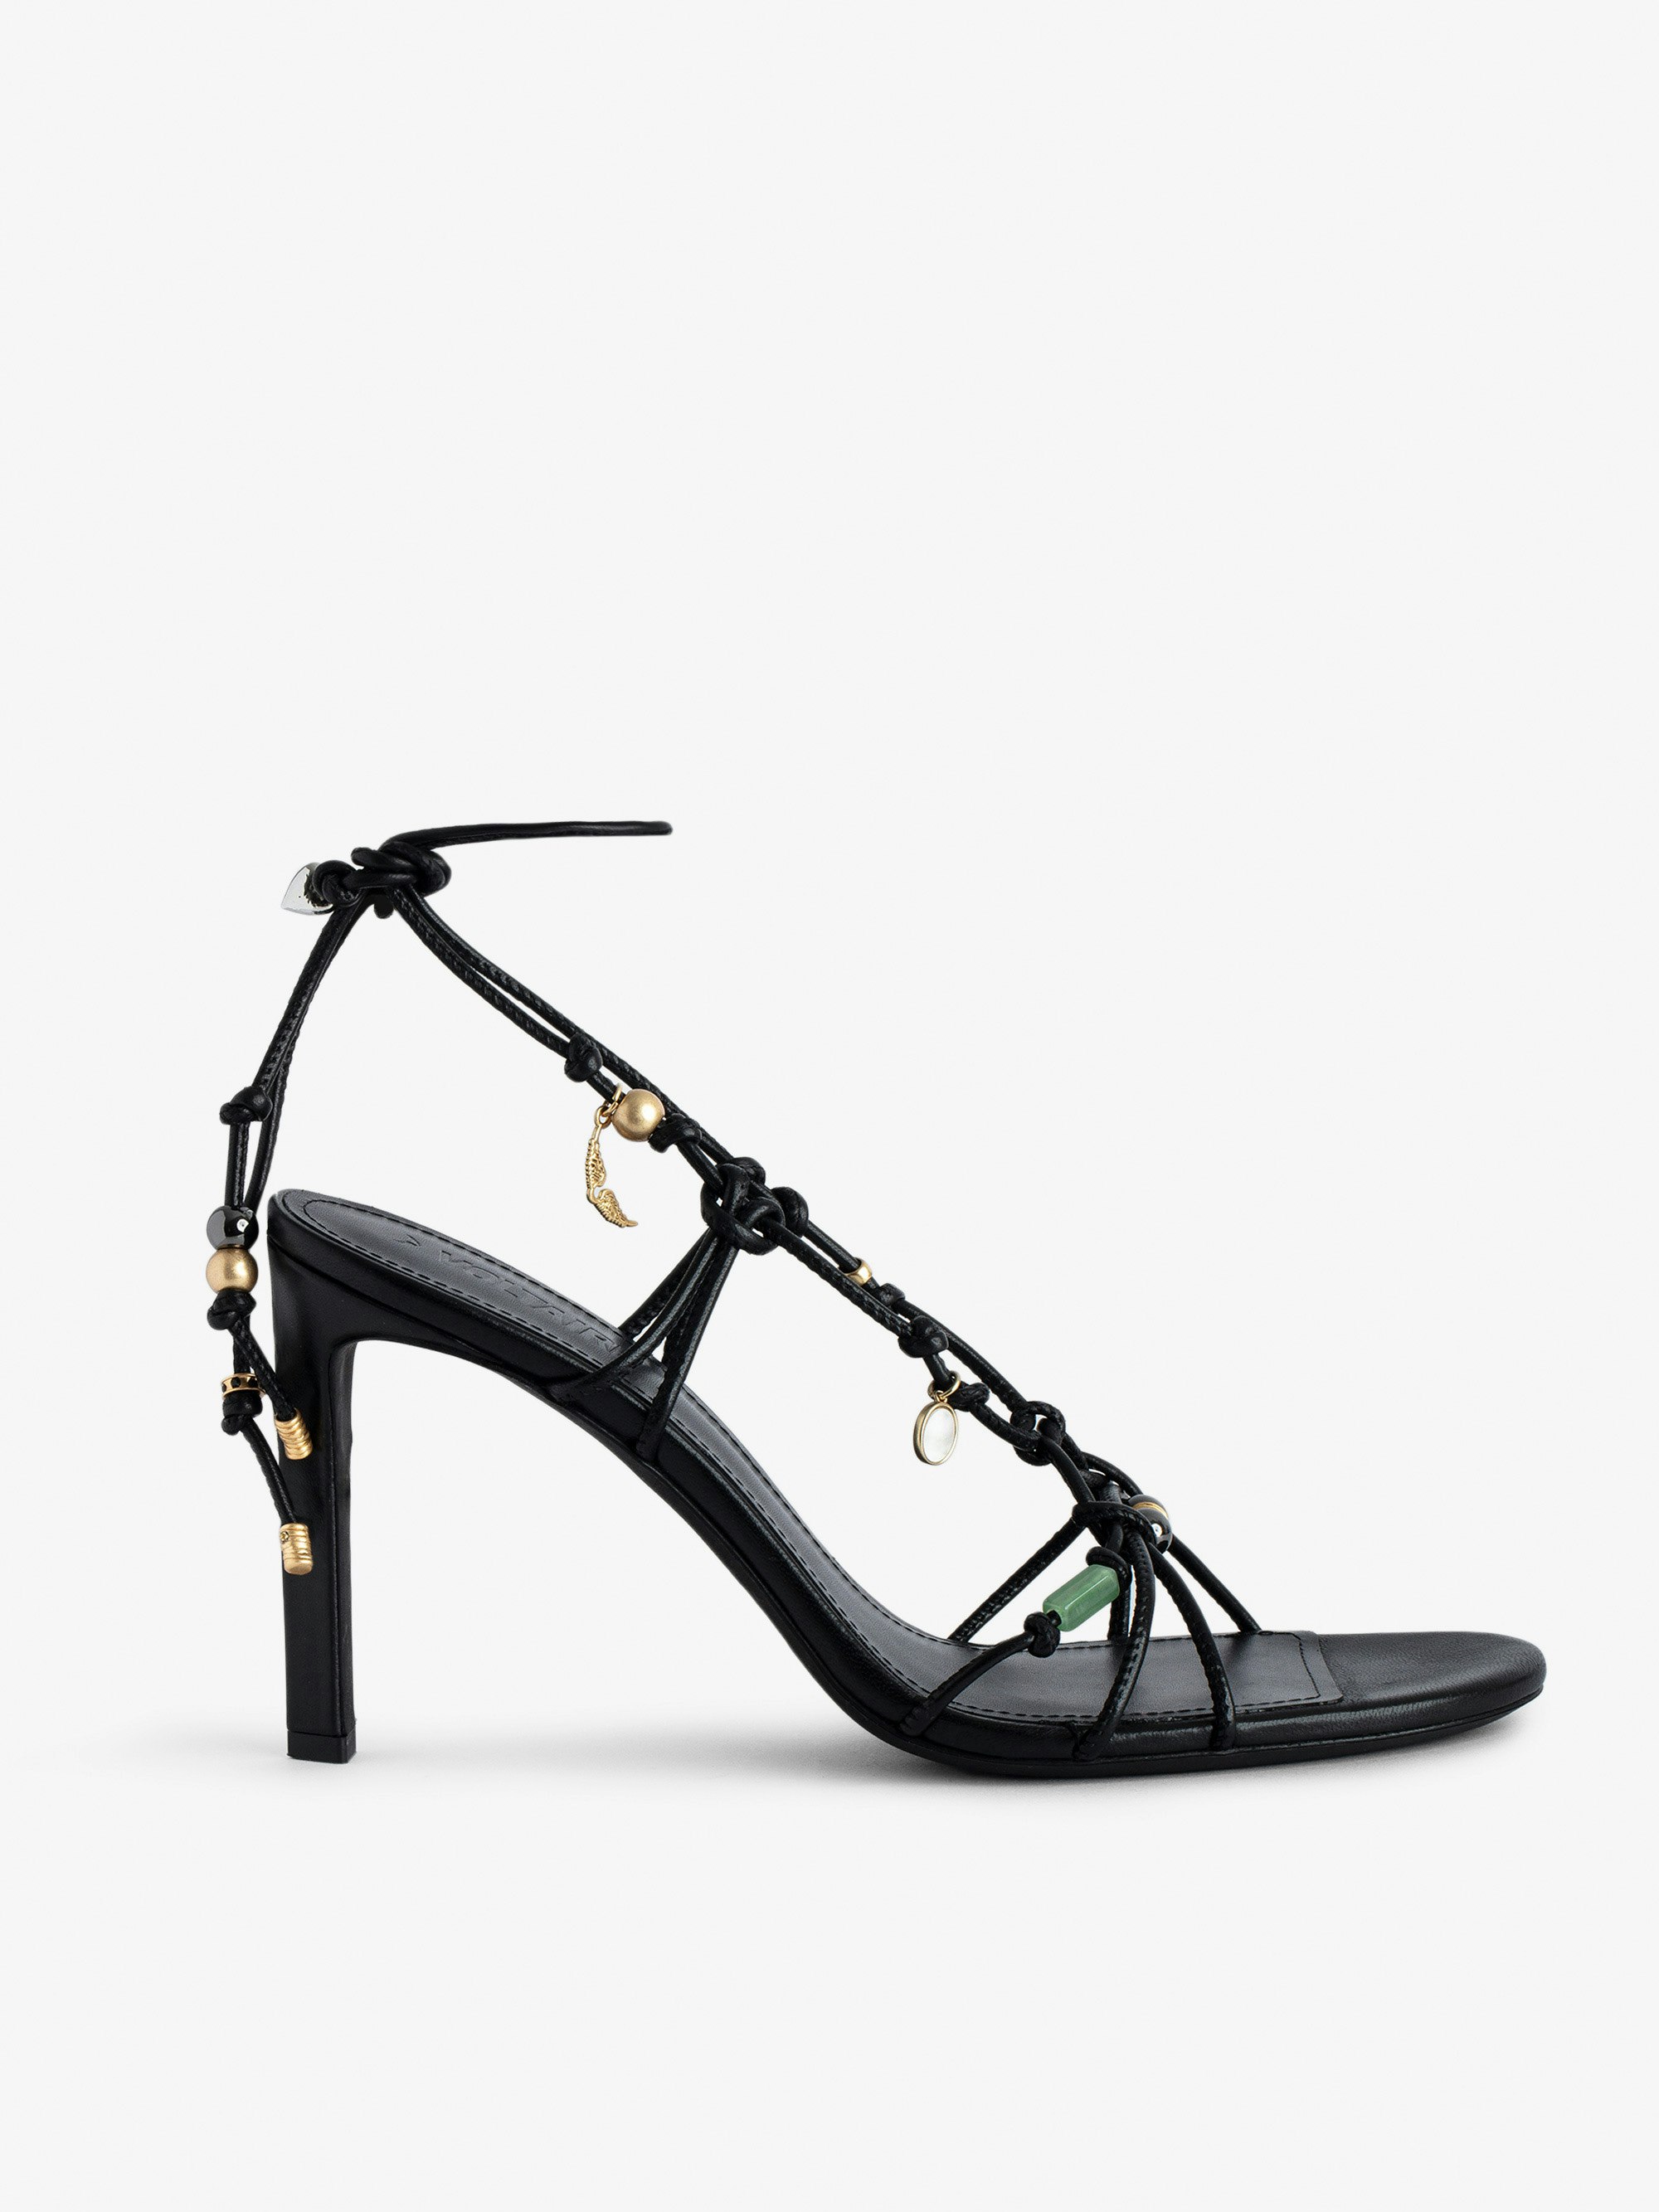 Alana Sandals - Black smooth leather heeled sandals with tied straps and charms.